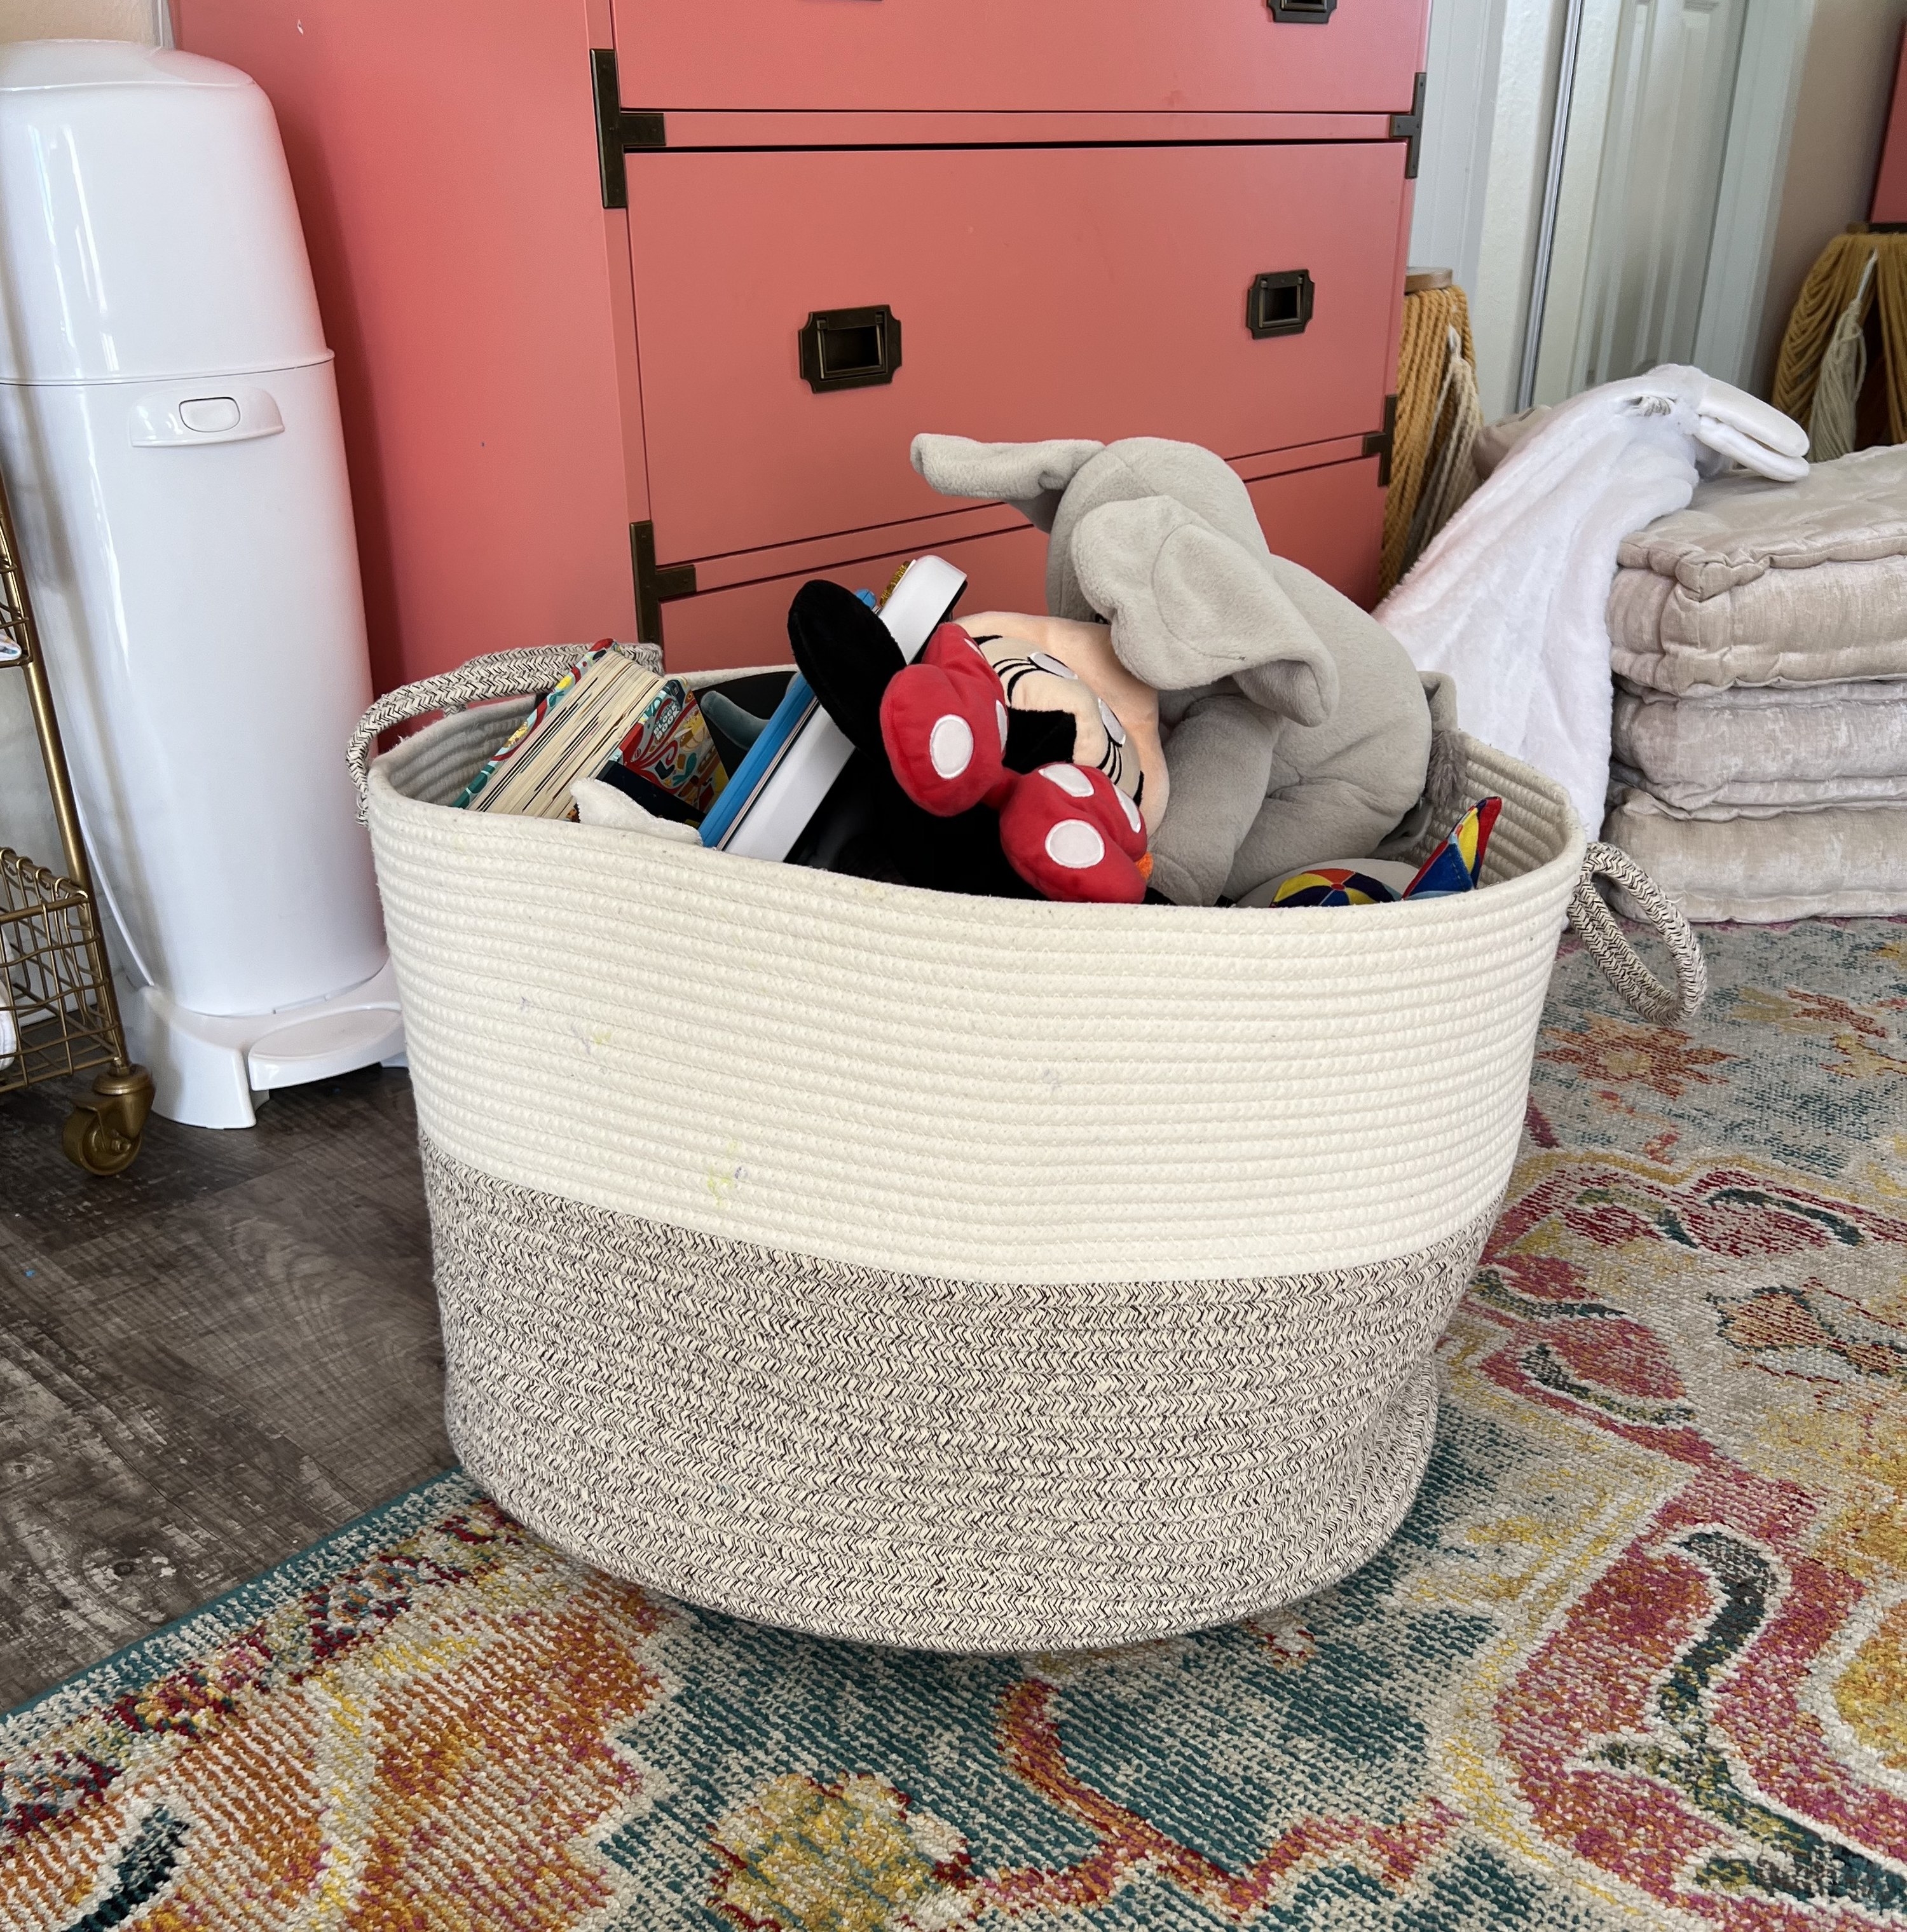 A woven basket with toys in it